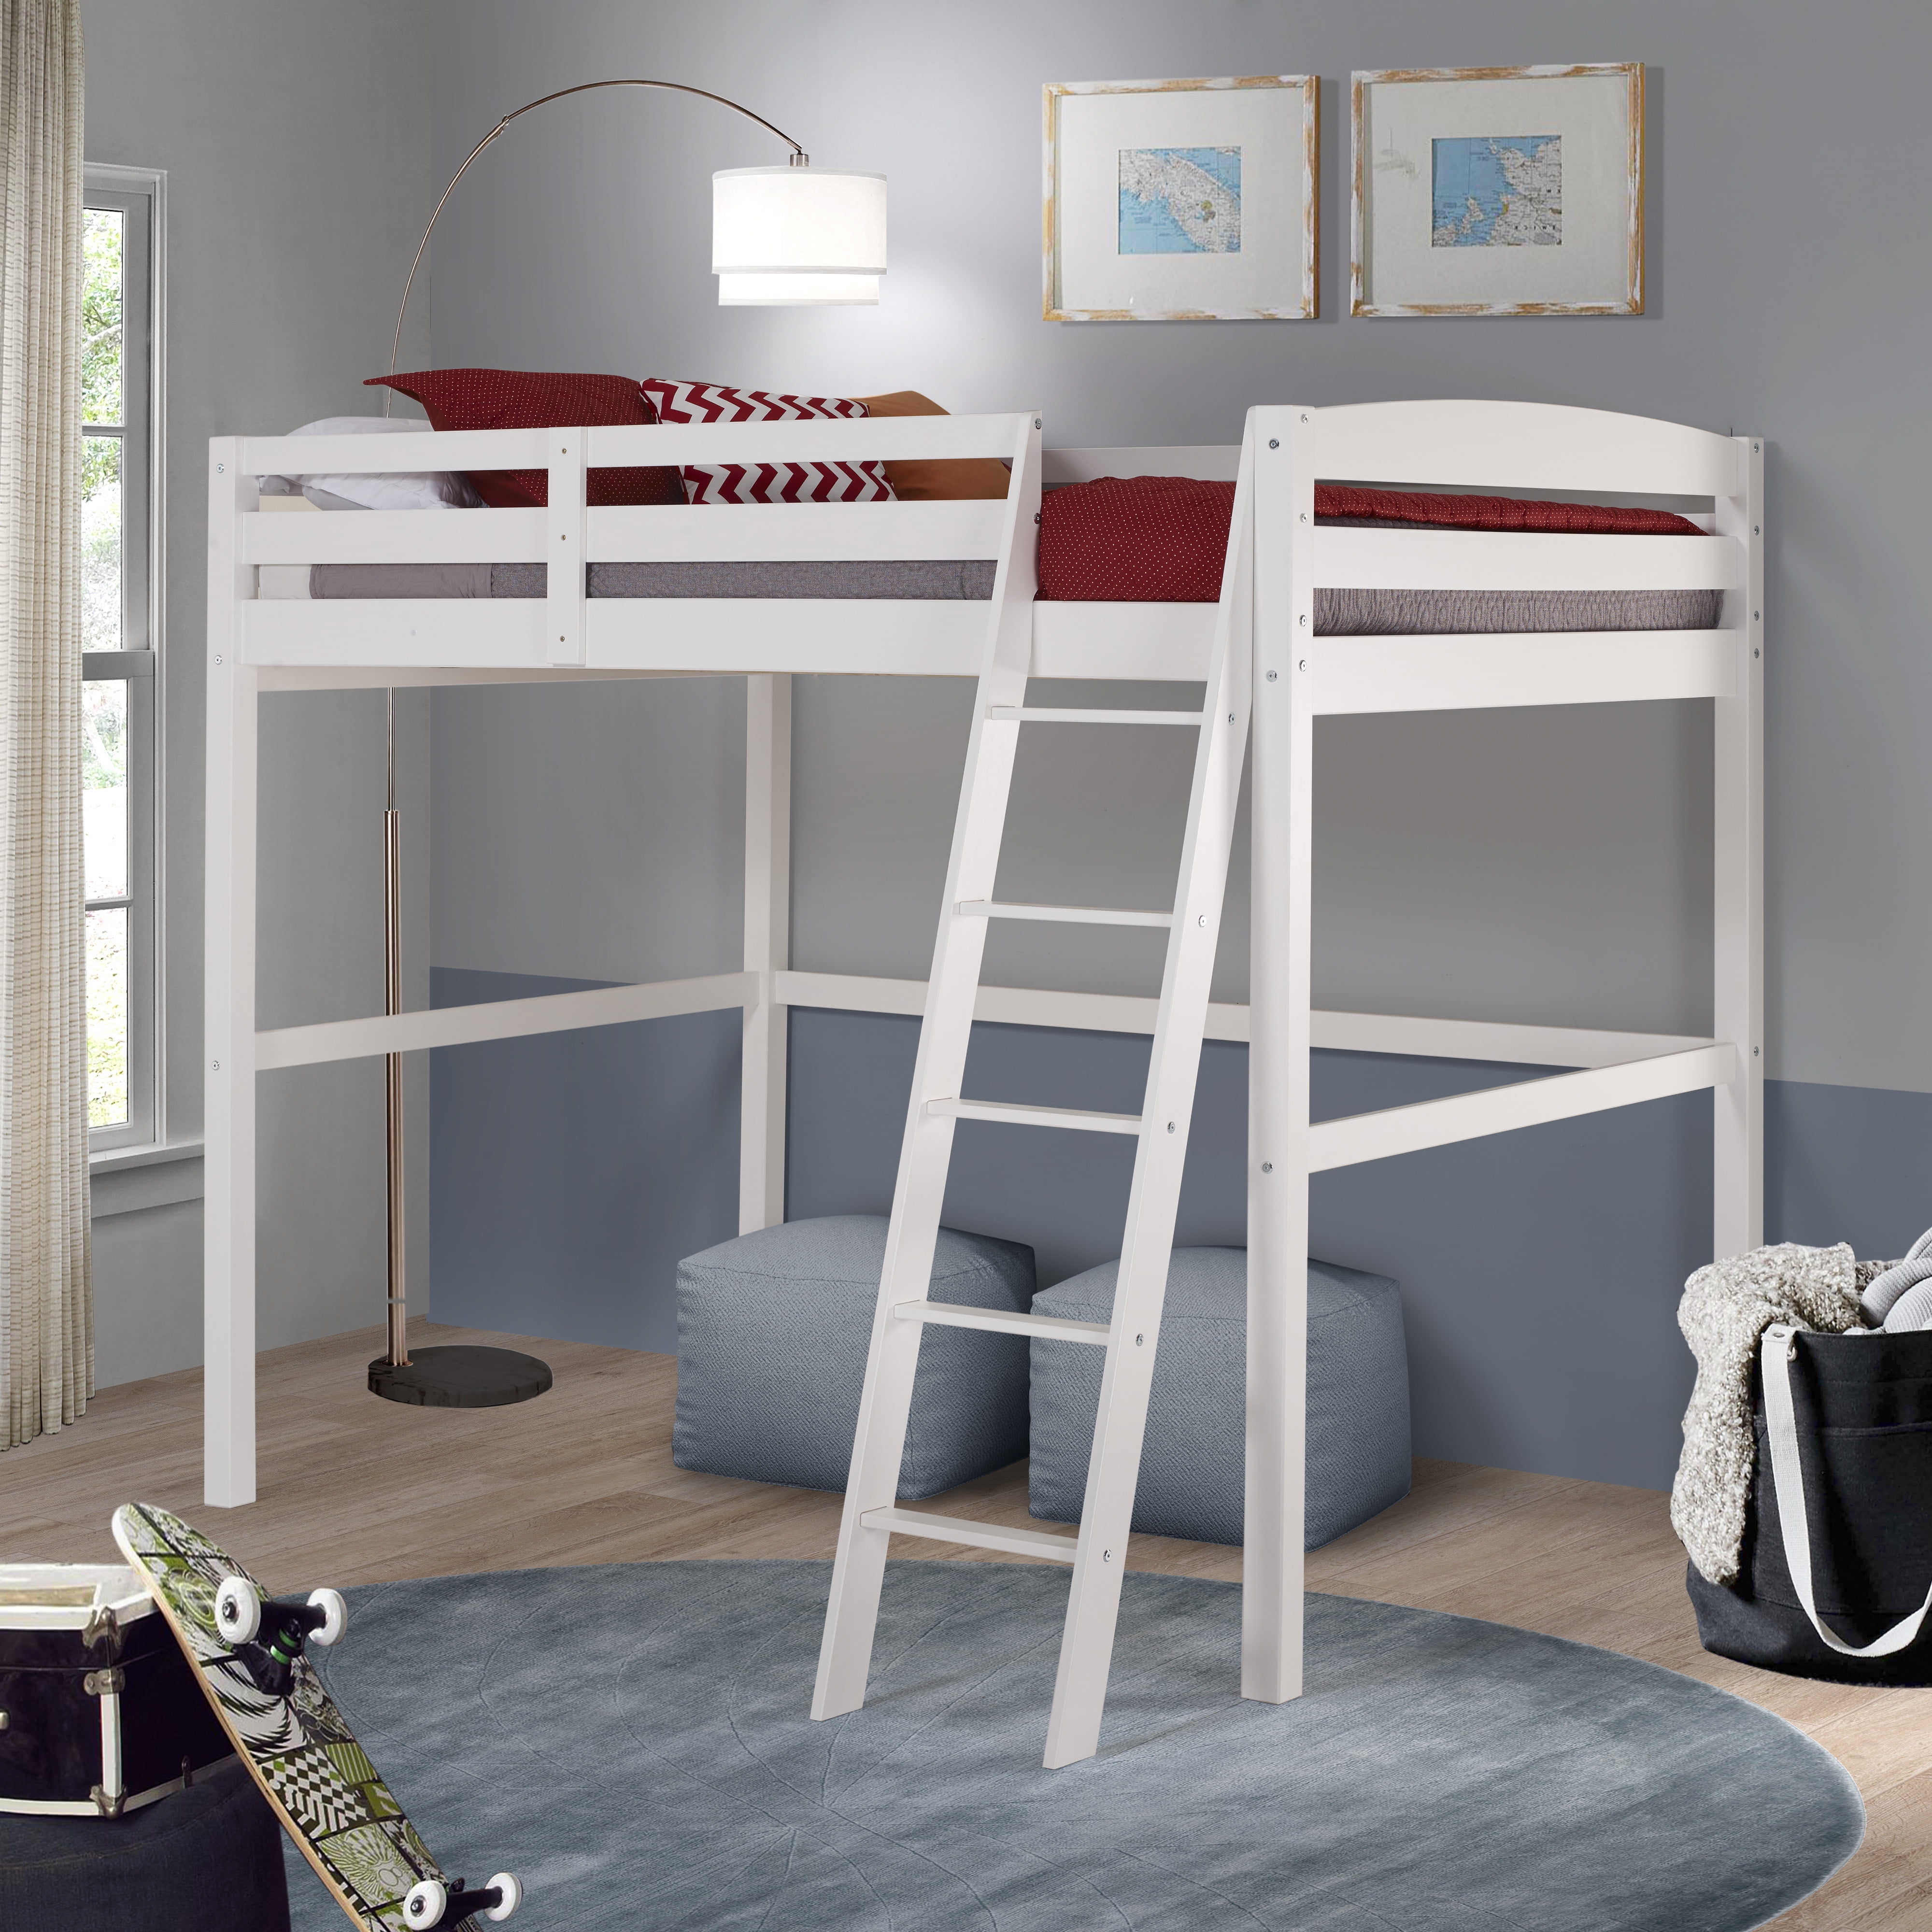 Concord Twin Size High Loft Bed White, Bunk Bed With Open Bottom